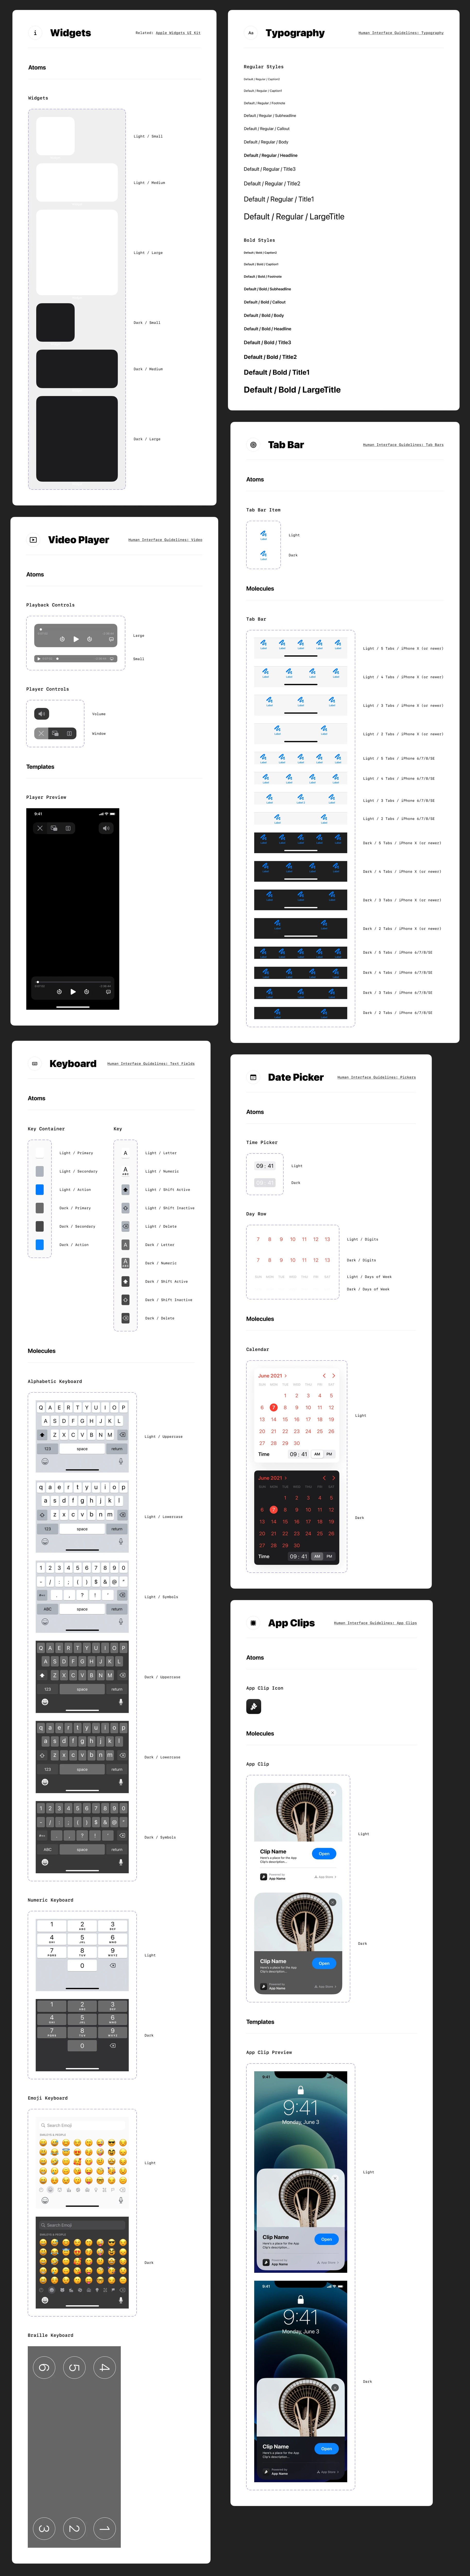 iOS 15 Free UI Kit for Figma - This free UI Kit includes dozens of new and refactored components, text styles, color styles, hundreds of variants, light/dark mode, & more.